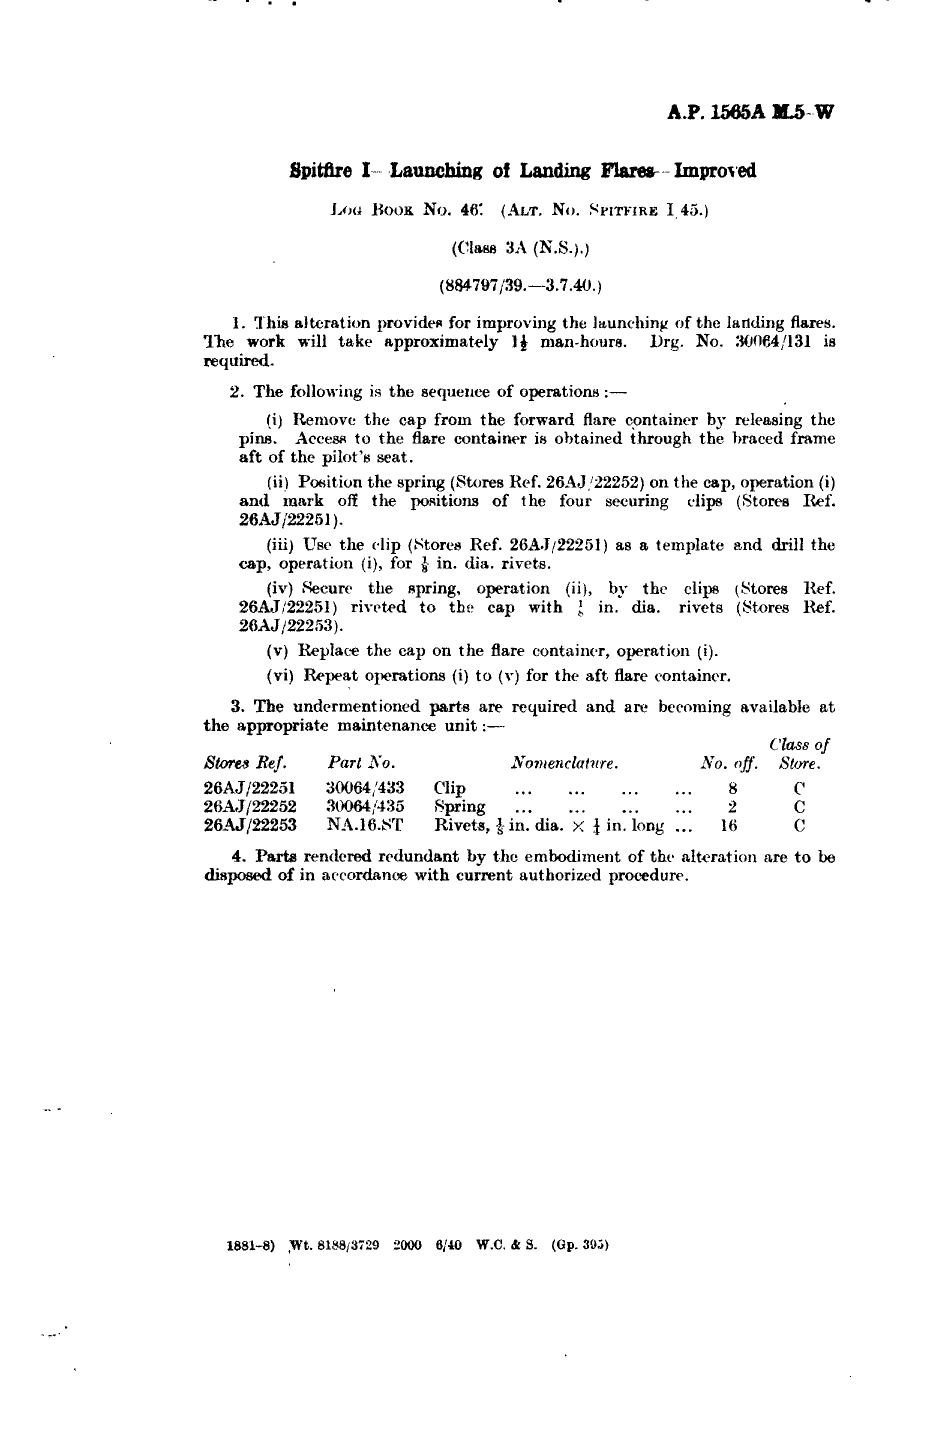 Sample page 1 from AirCorps Library document: Spitfire I Launching of Landing Flares Improved